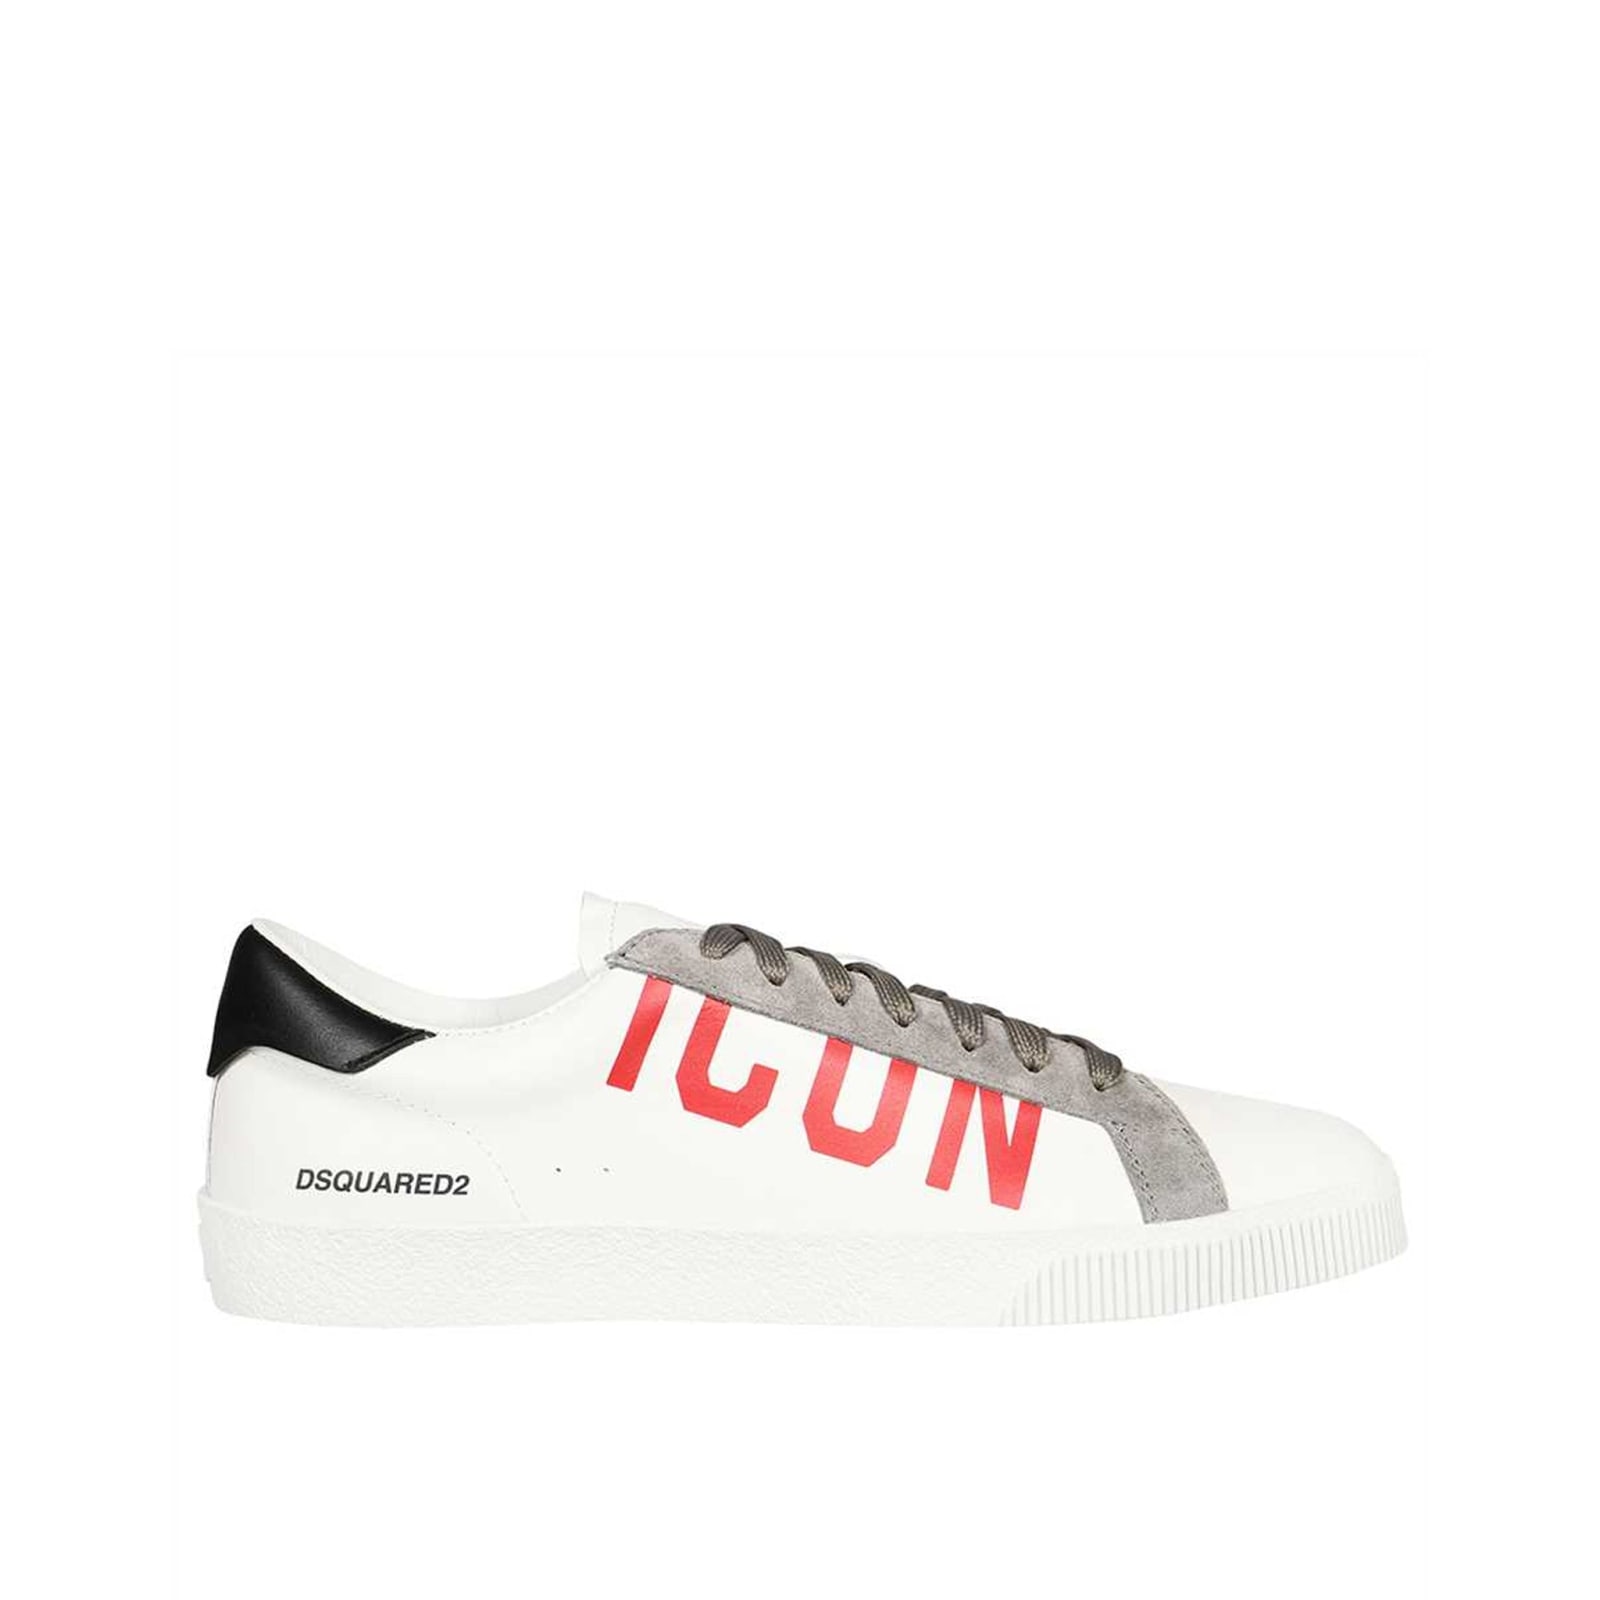 DSQUARED2 CASSETTA LEATHER trainers